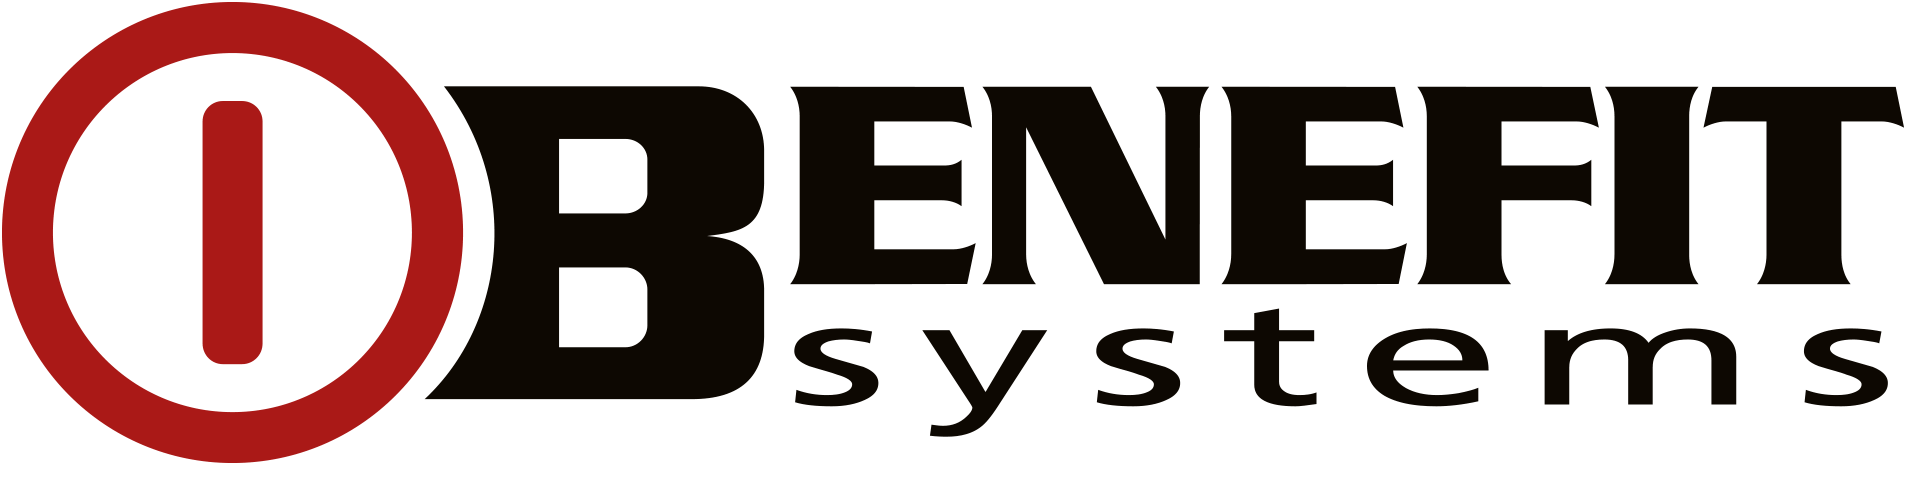 Logo Benefit Systems